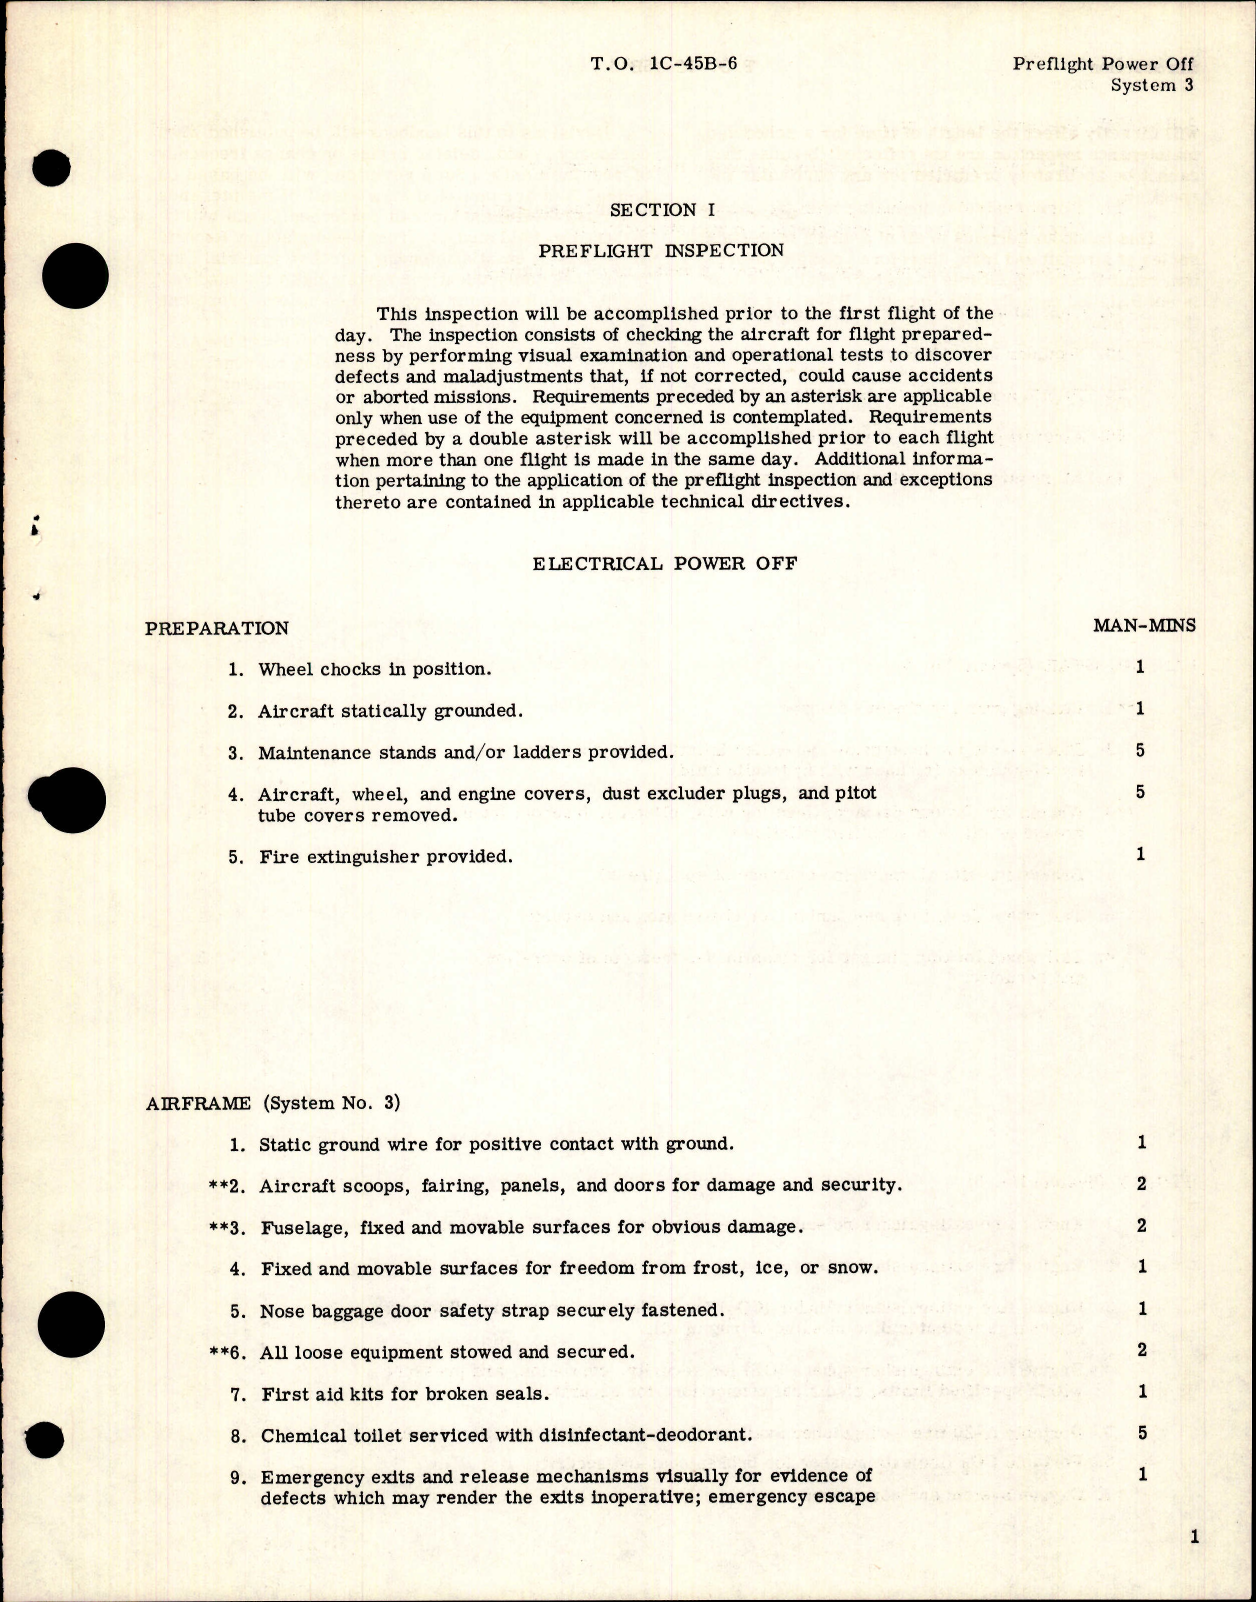 Sample page 5 from AirCorps Library document: Inspection Requirements for C-45 